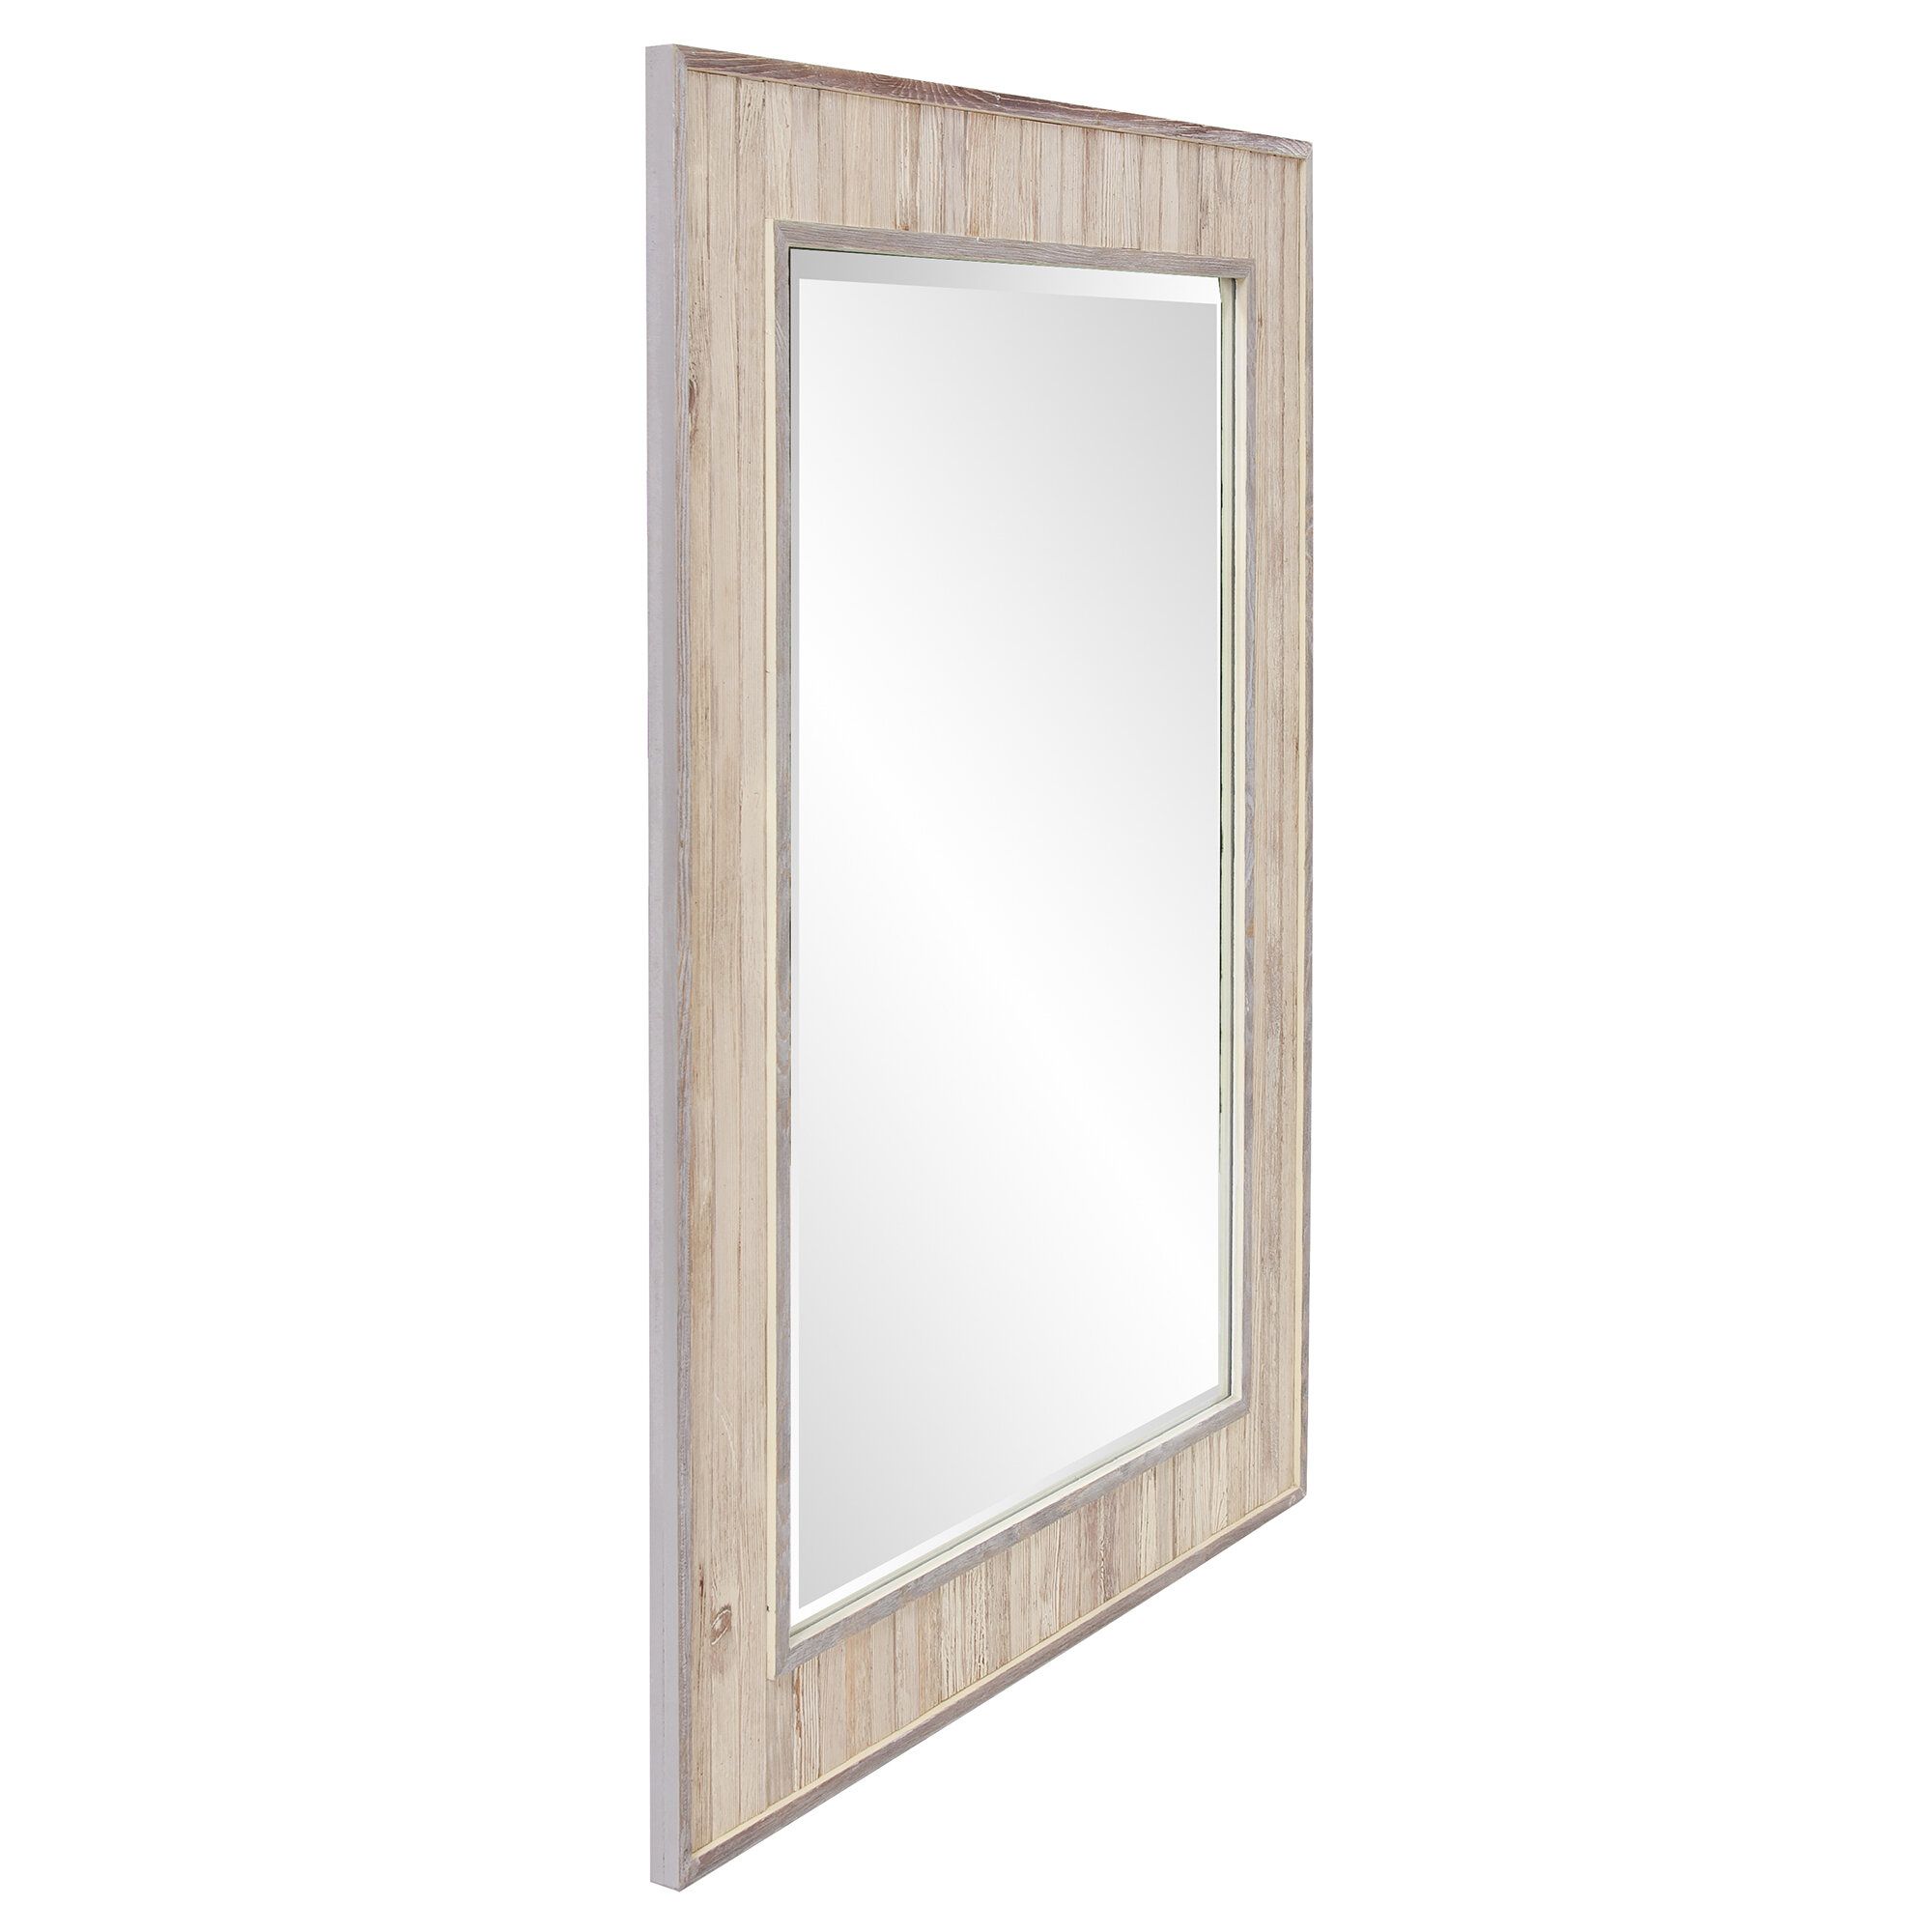 Farmhouse & Rustic Rosecliff Heights Wall & Accent Mirrors Within Wallingford Large Frameless Wall Mirrors (View 26 of 30)